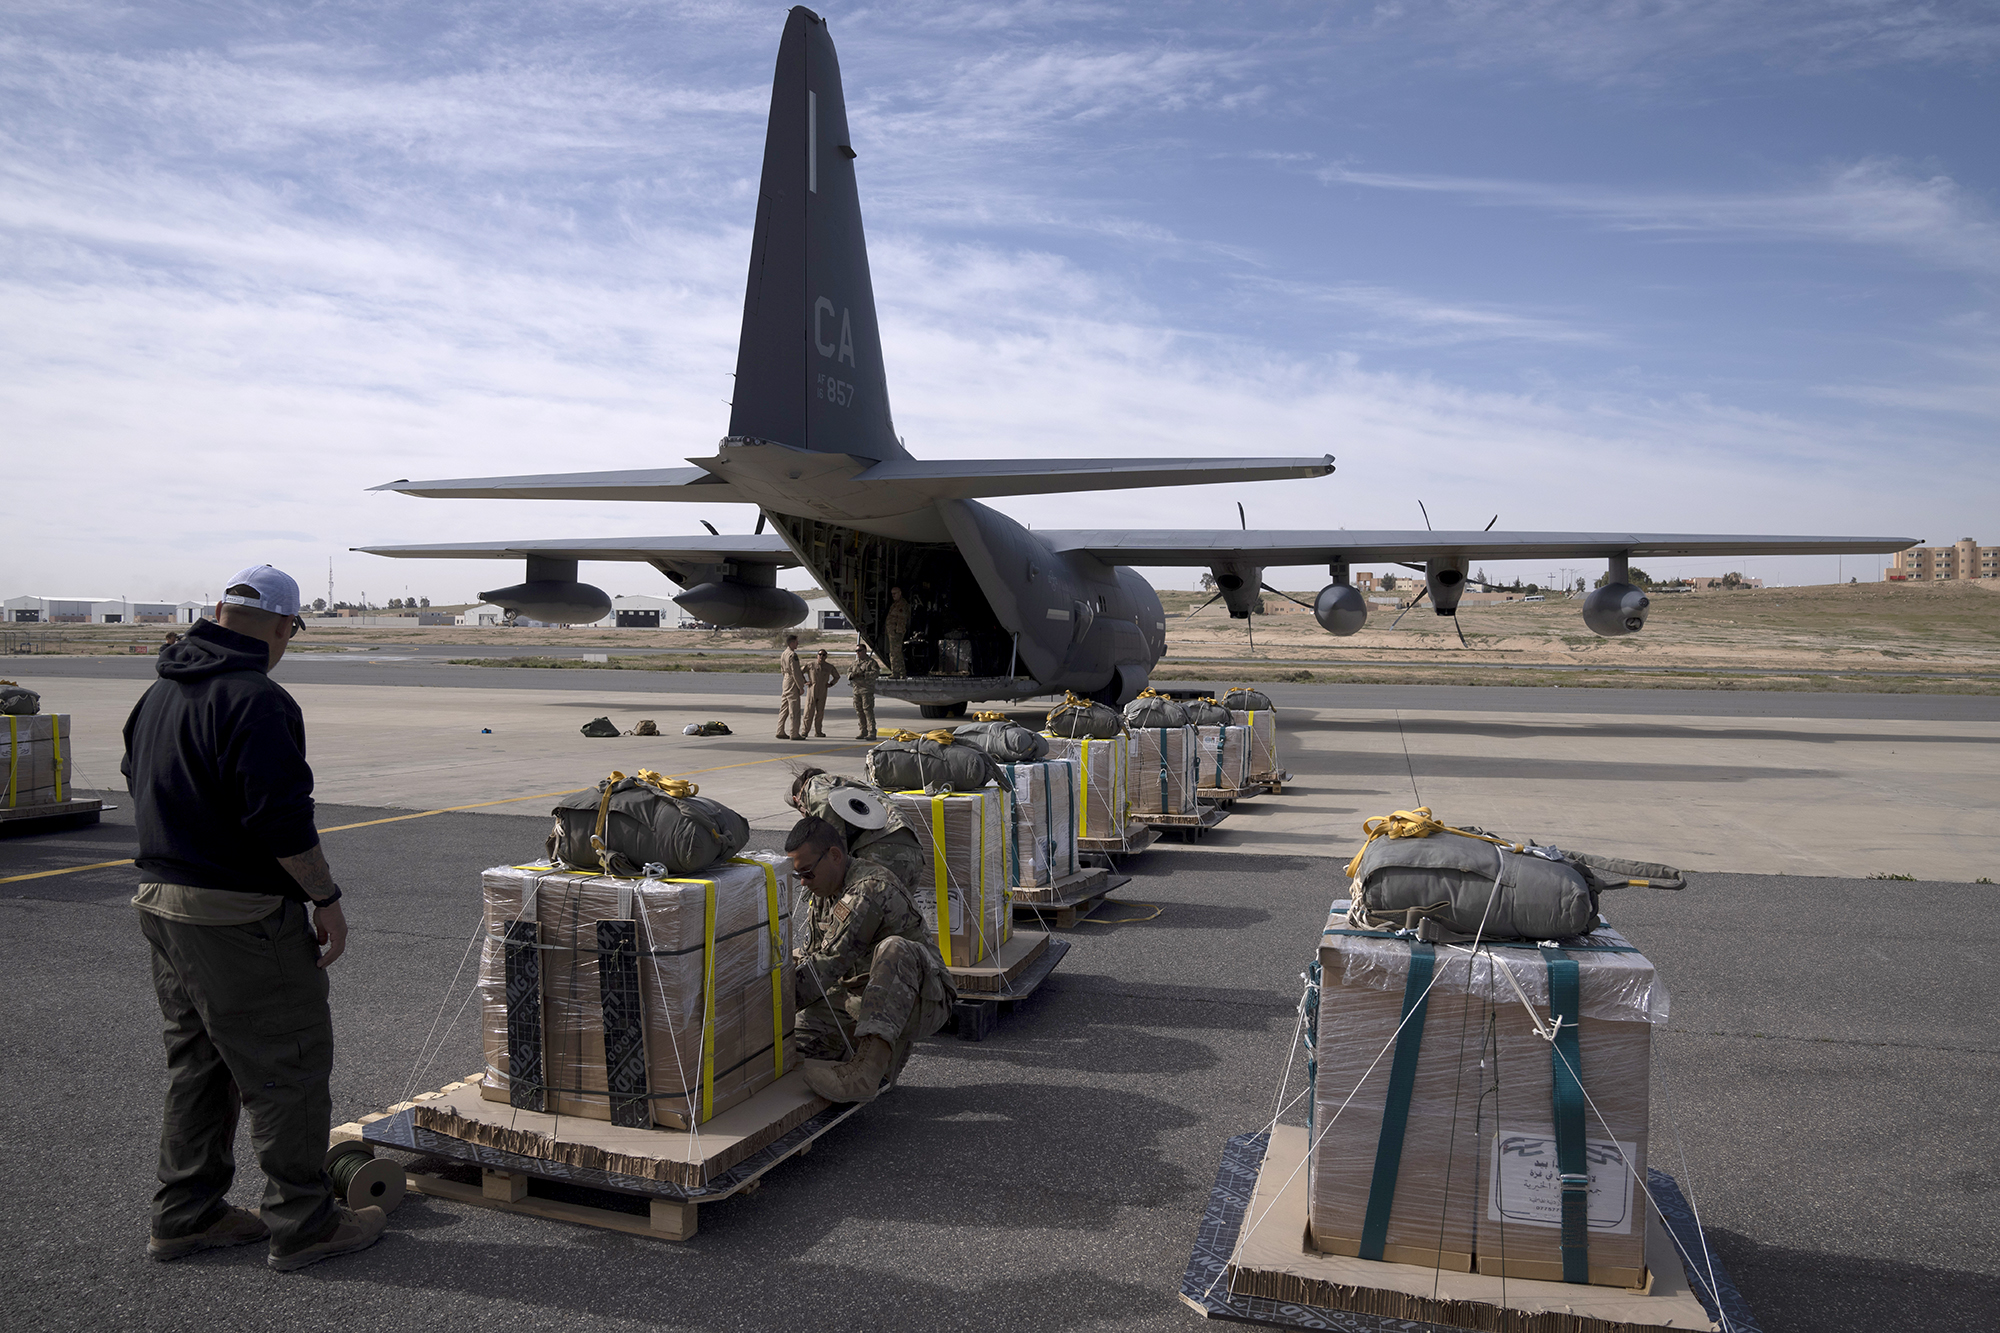 Members of the U.S. Air Force check the containers before loading an airplane with humanitarian aid to be dropped over Gaza at an area in Jordan, on March 14.